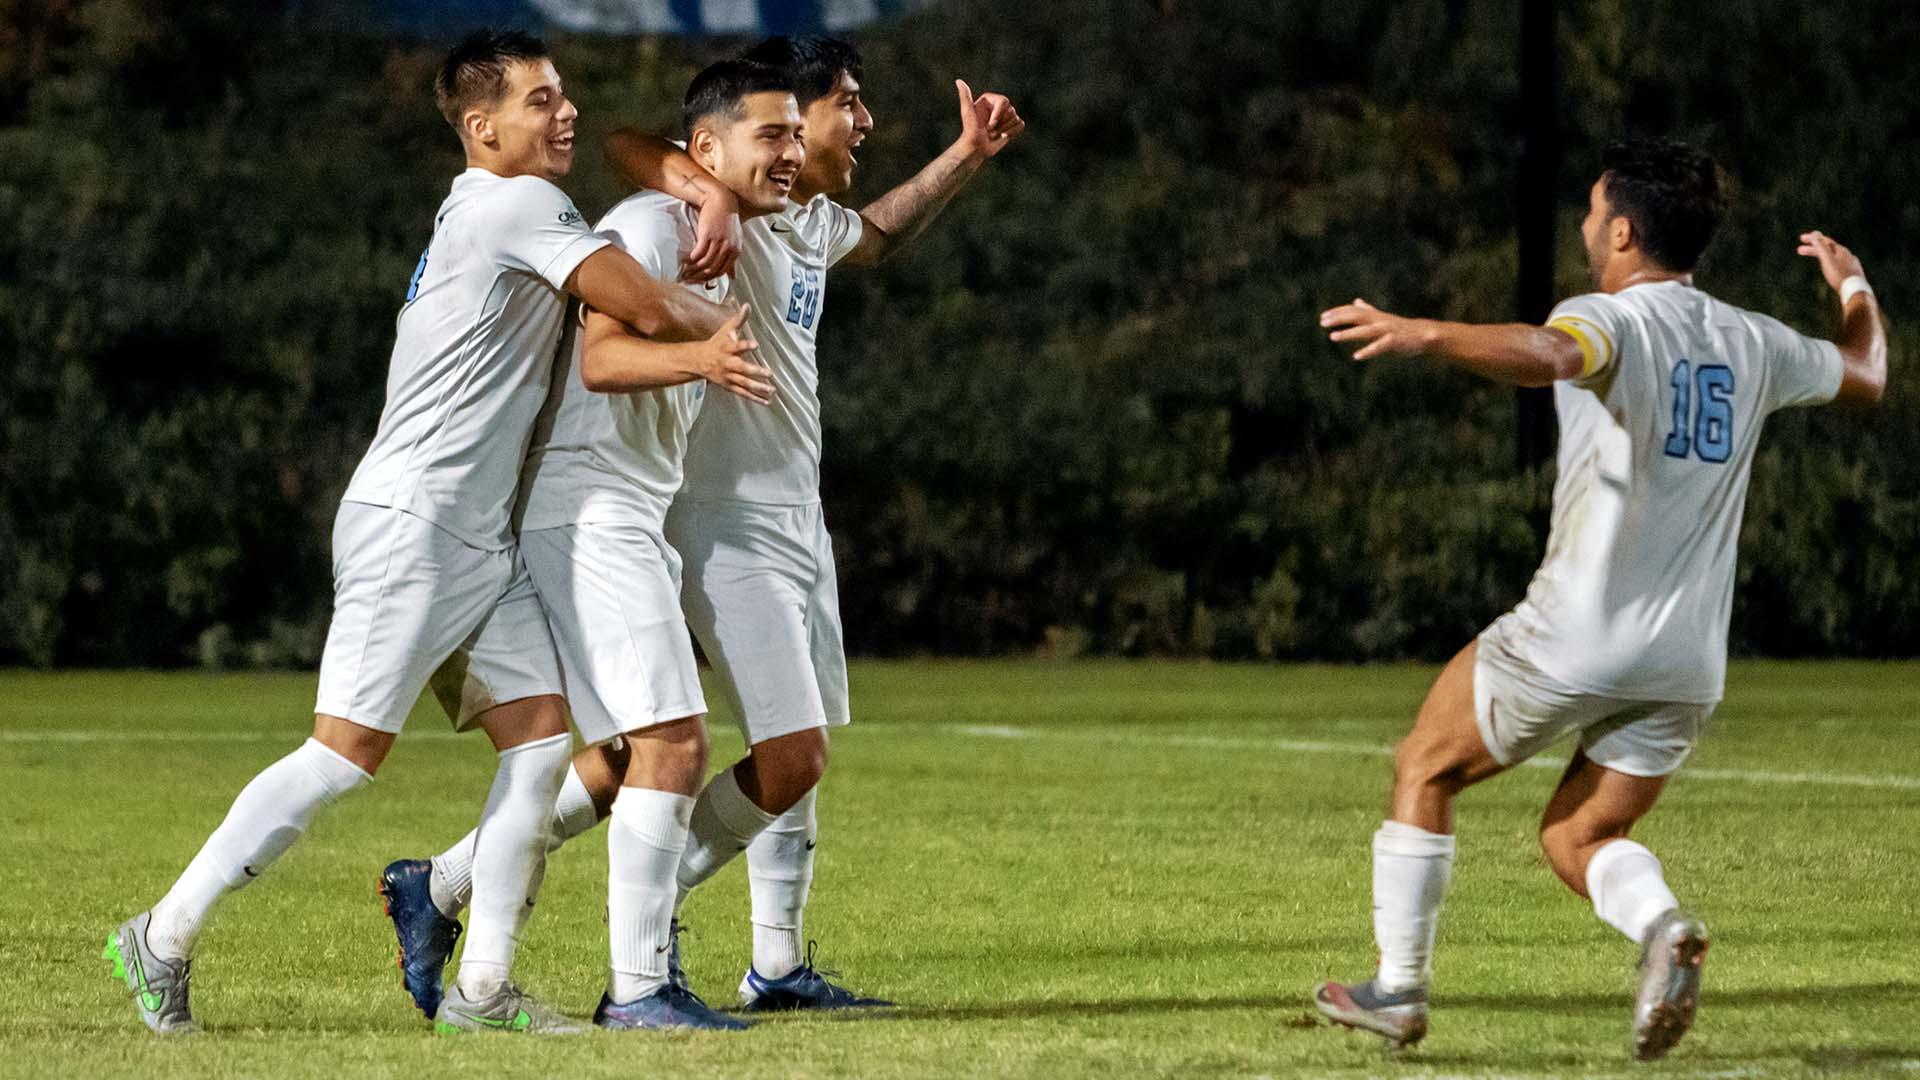 2021 NAIA Men's Soccer National Championship - Round 1 Preview